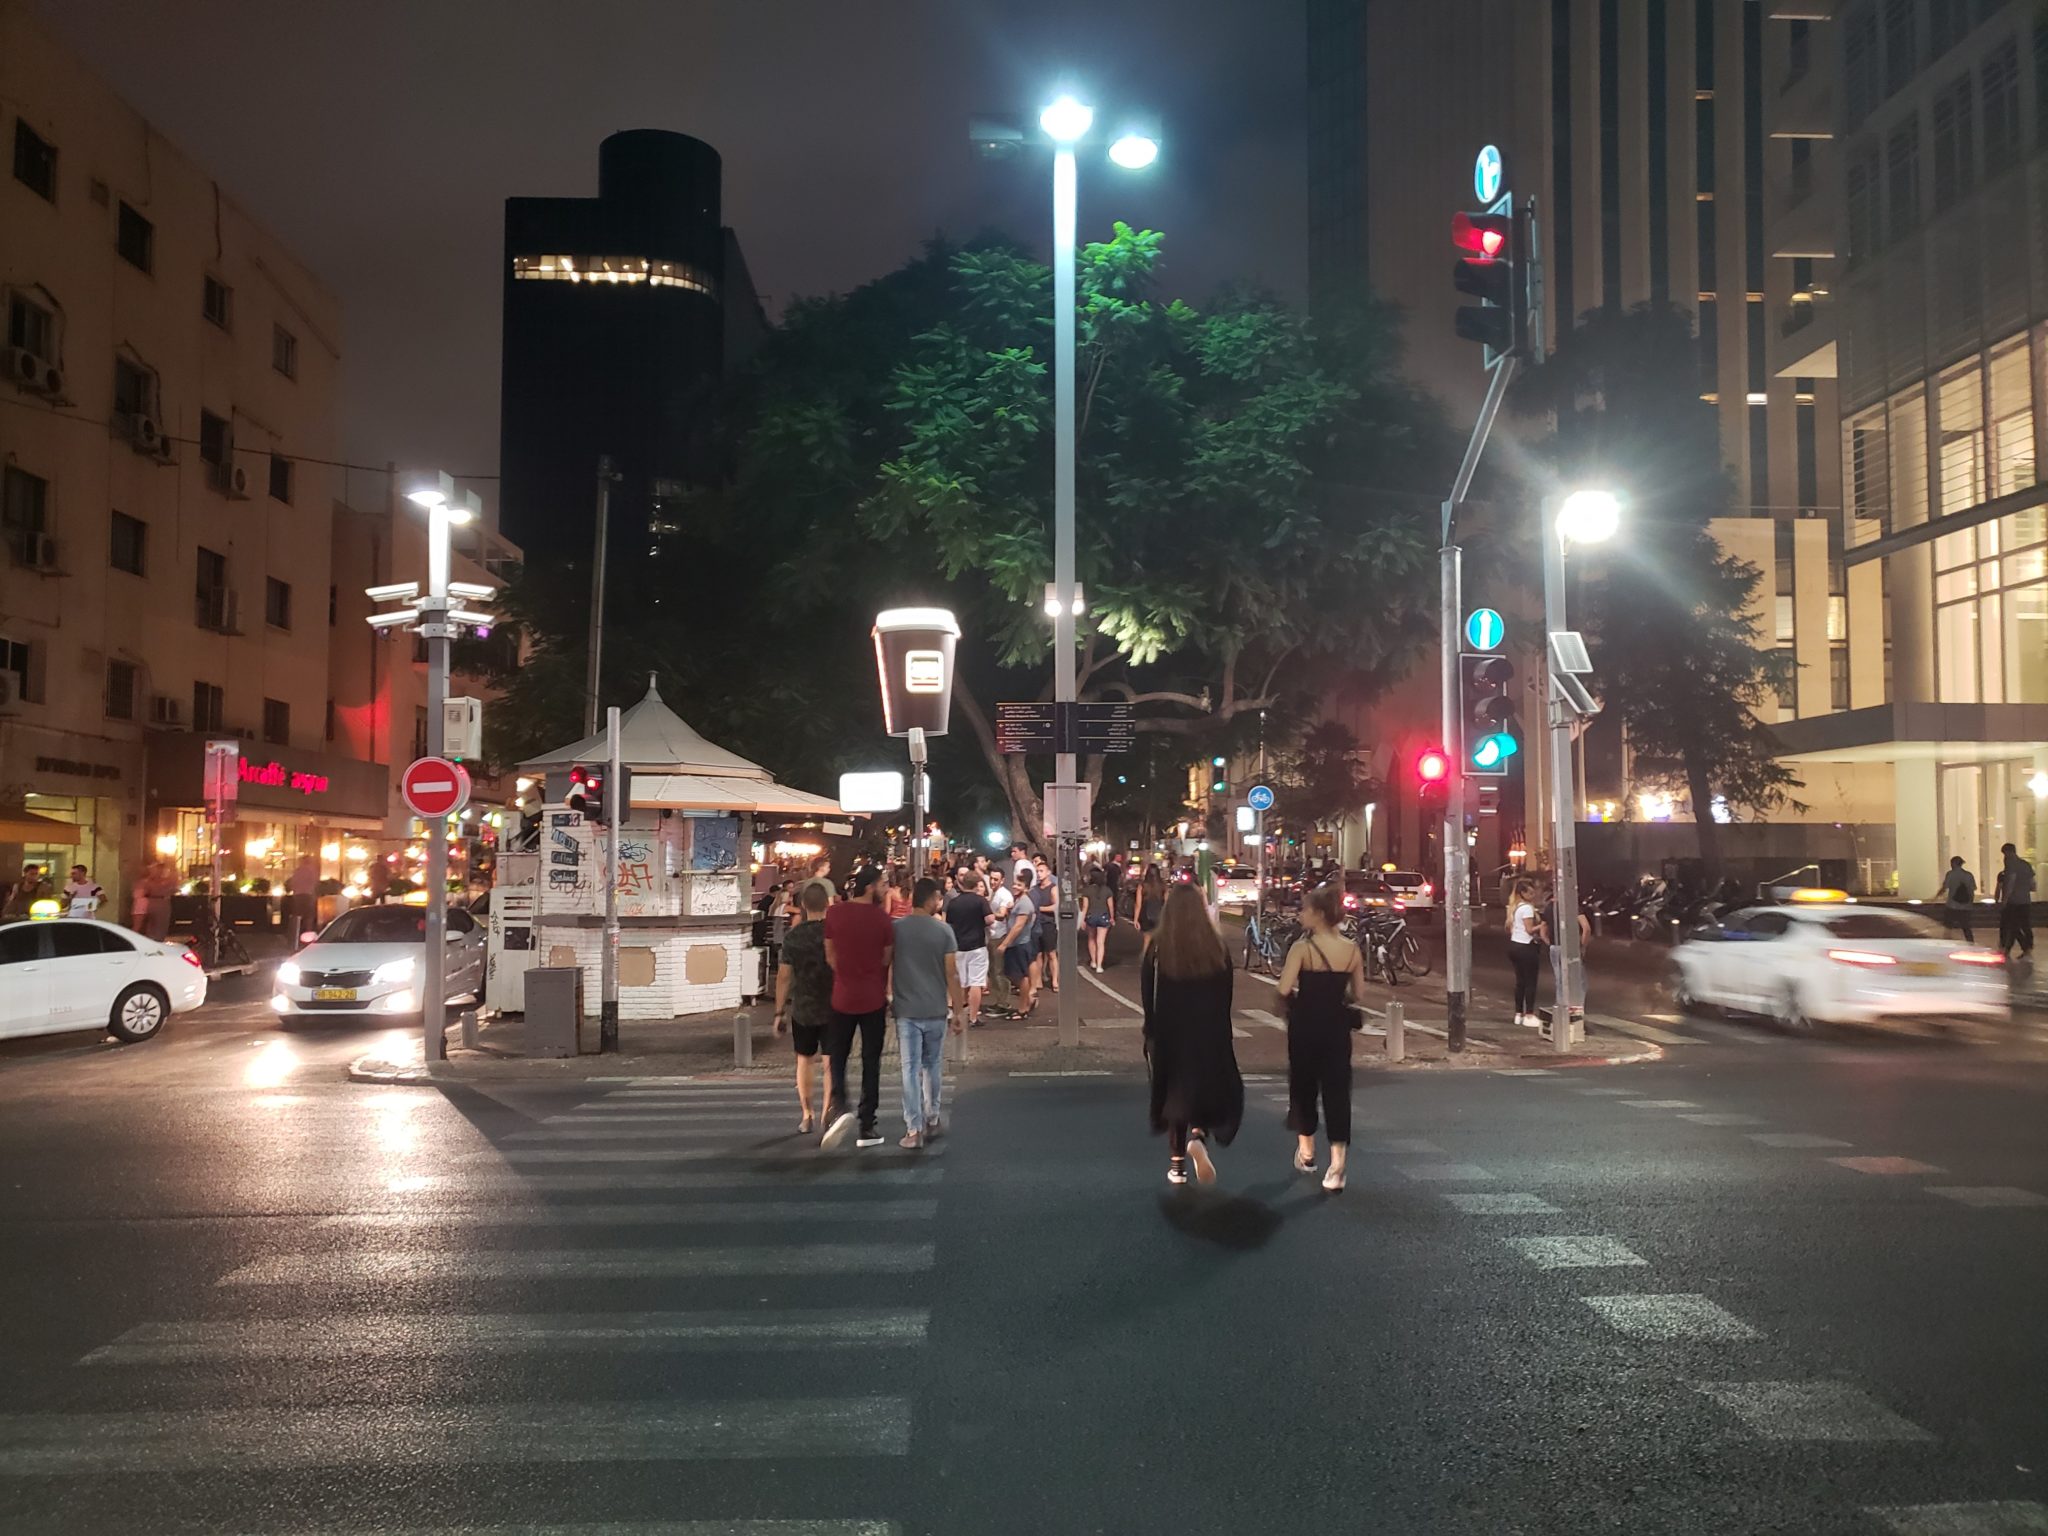 a group of people crossing a street at night